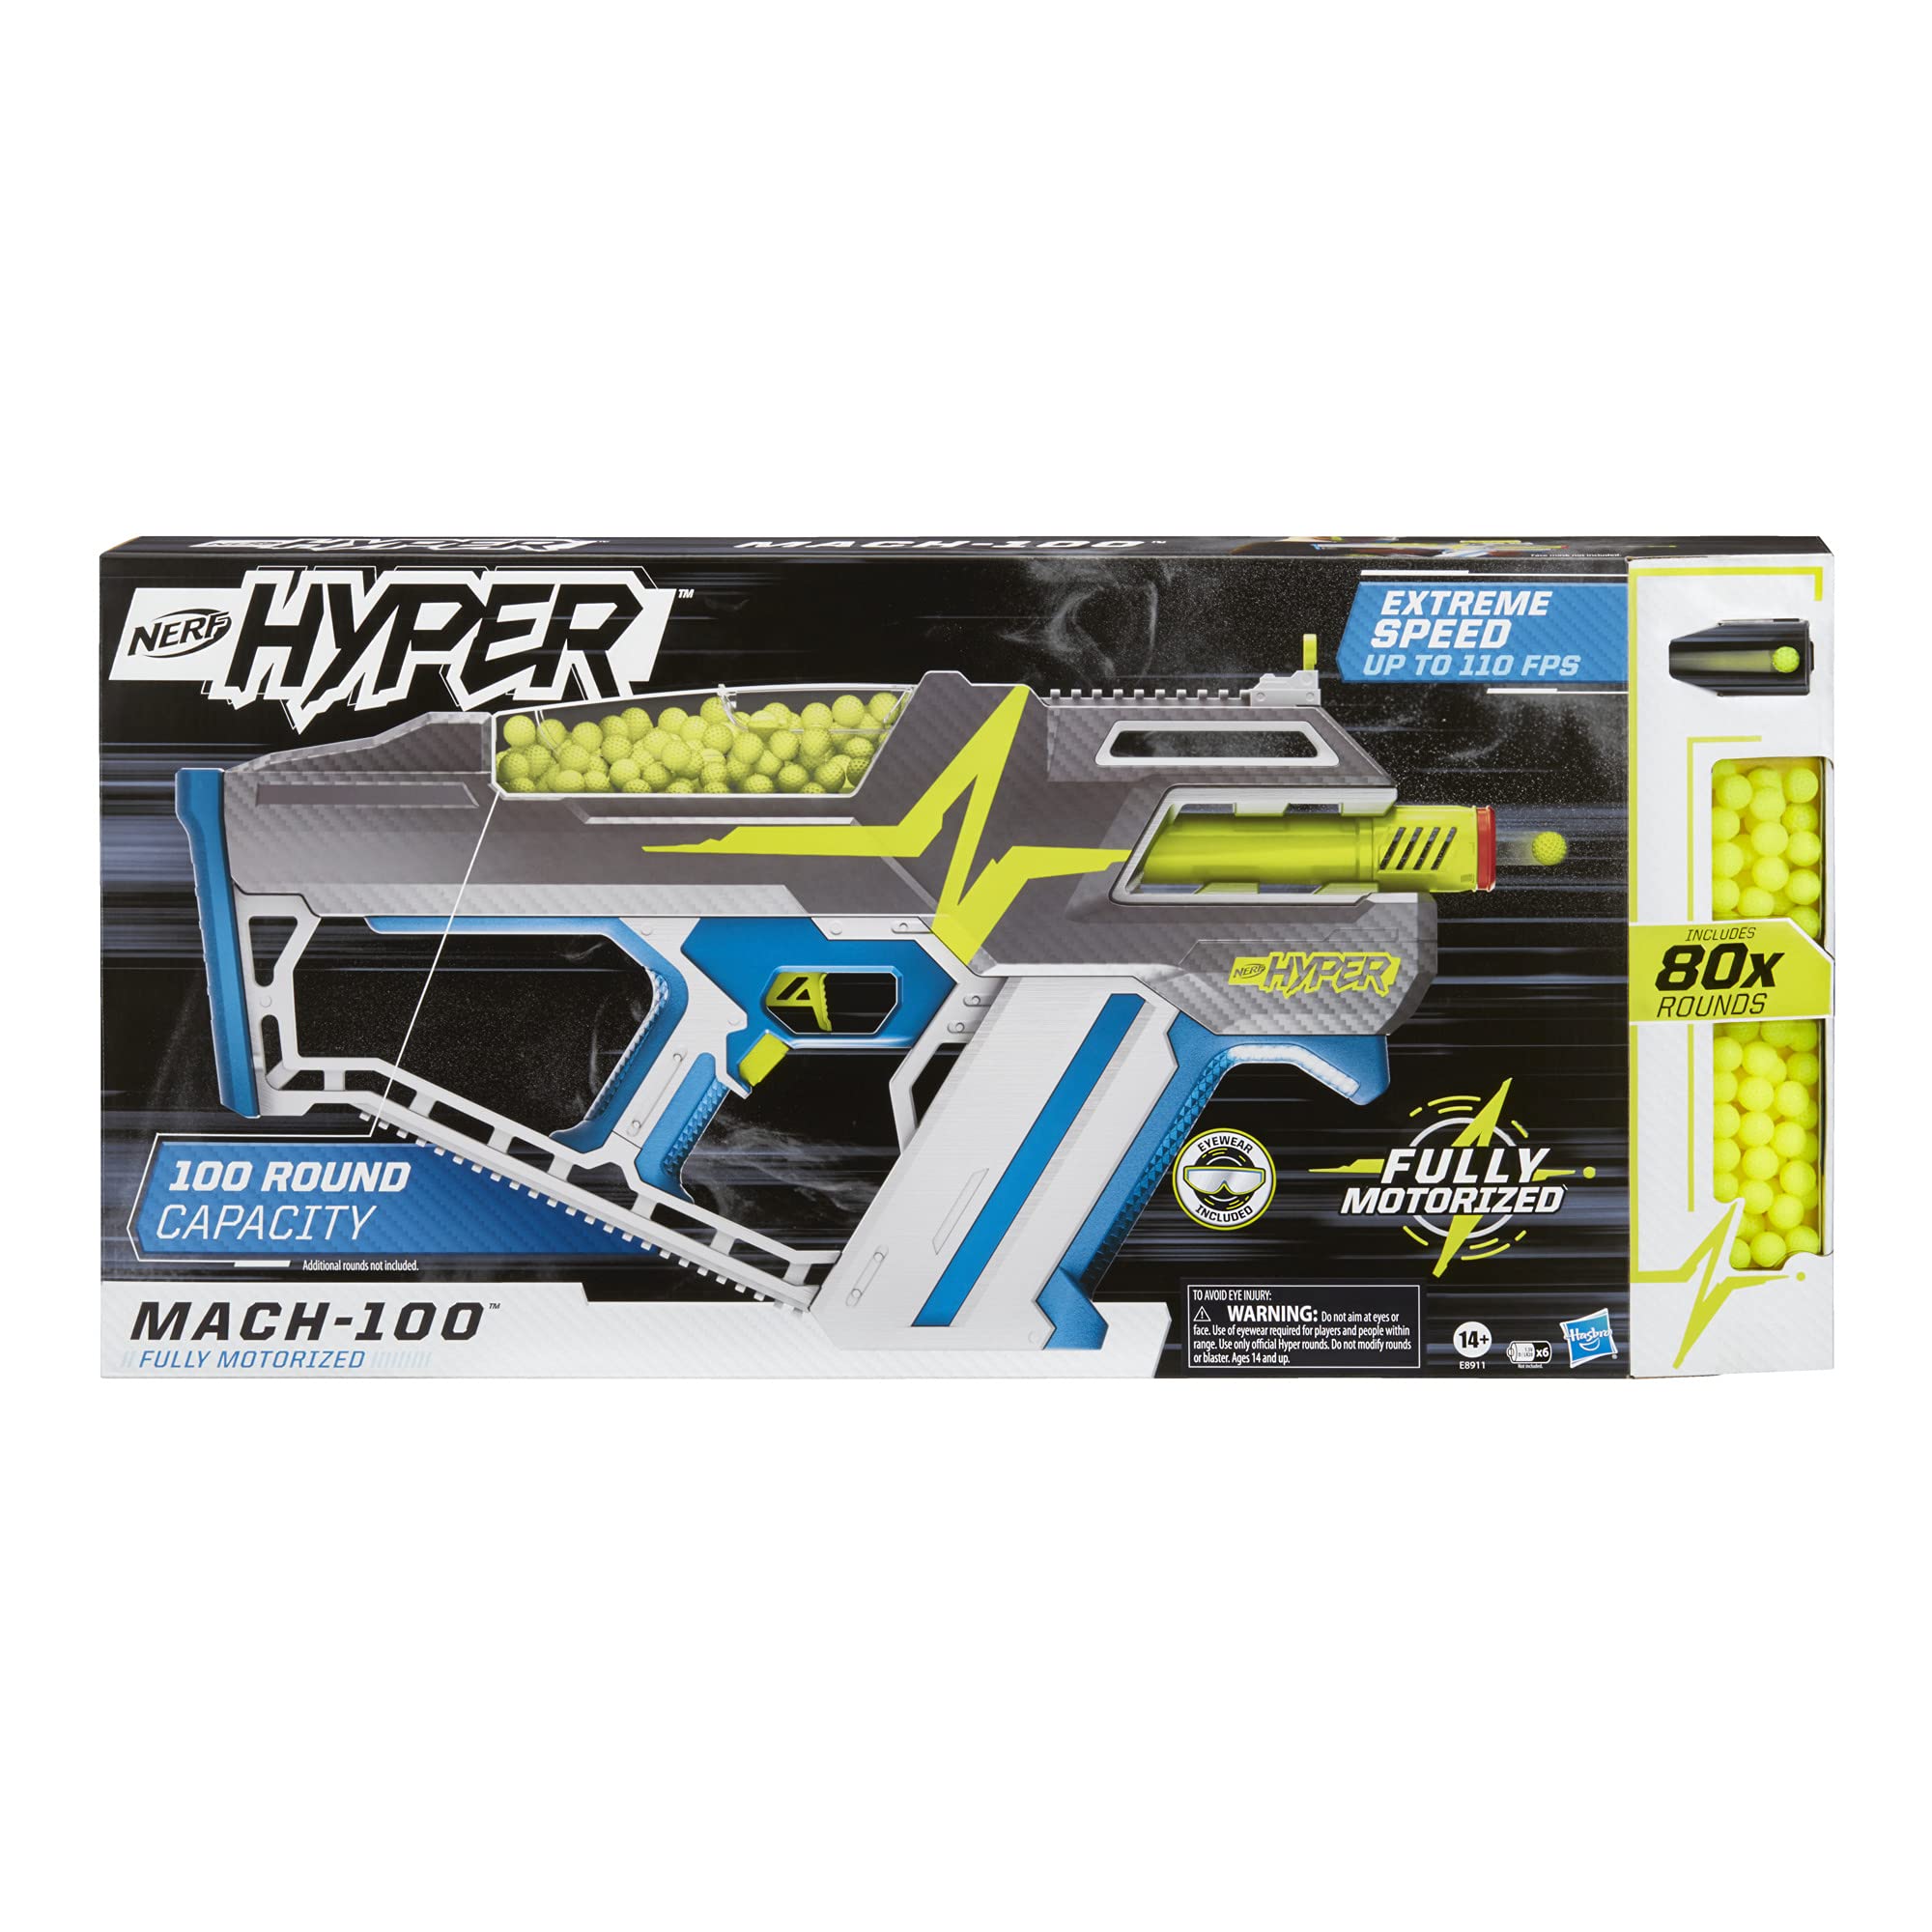 Nerf Hyper Mach-100 Fully Motorized Blaster $26.25 + Free Shipping w/ Prime or on $35+ orders